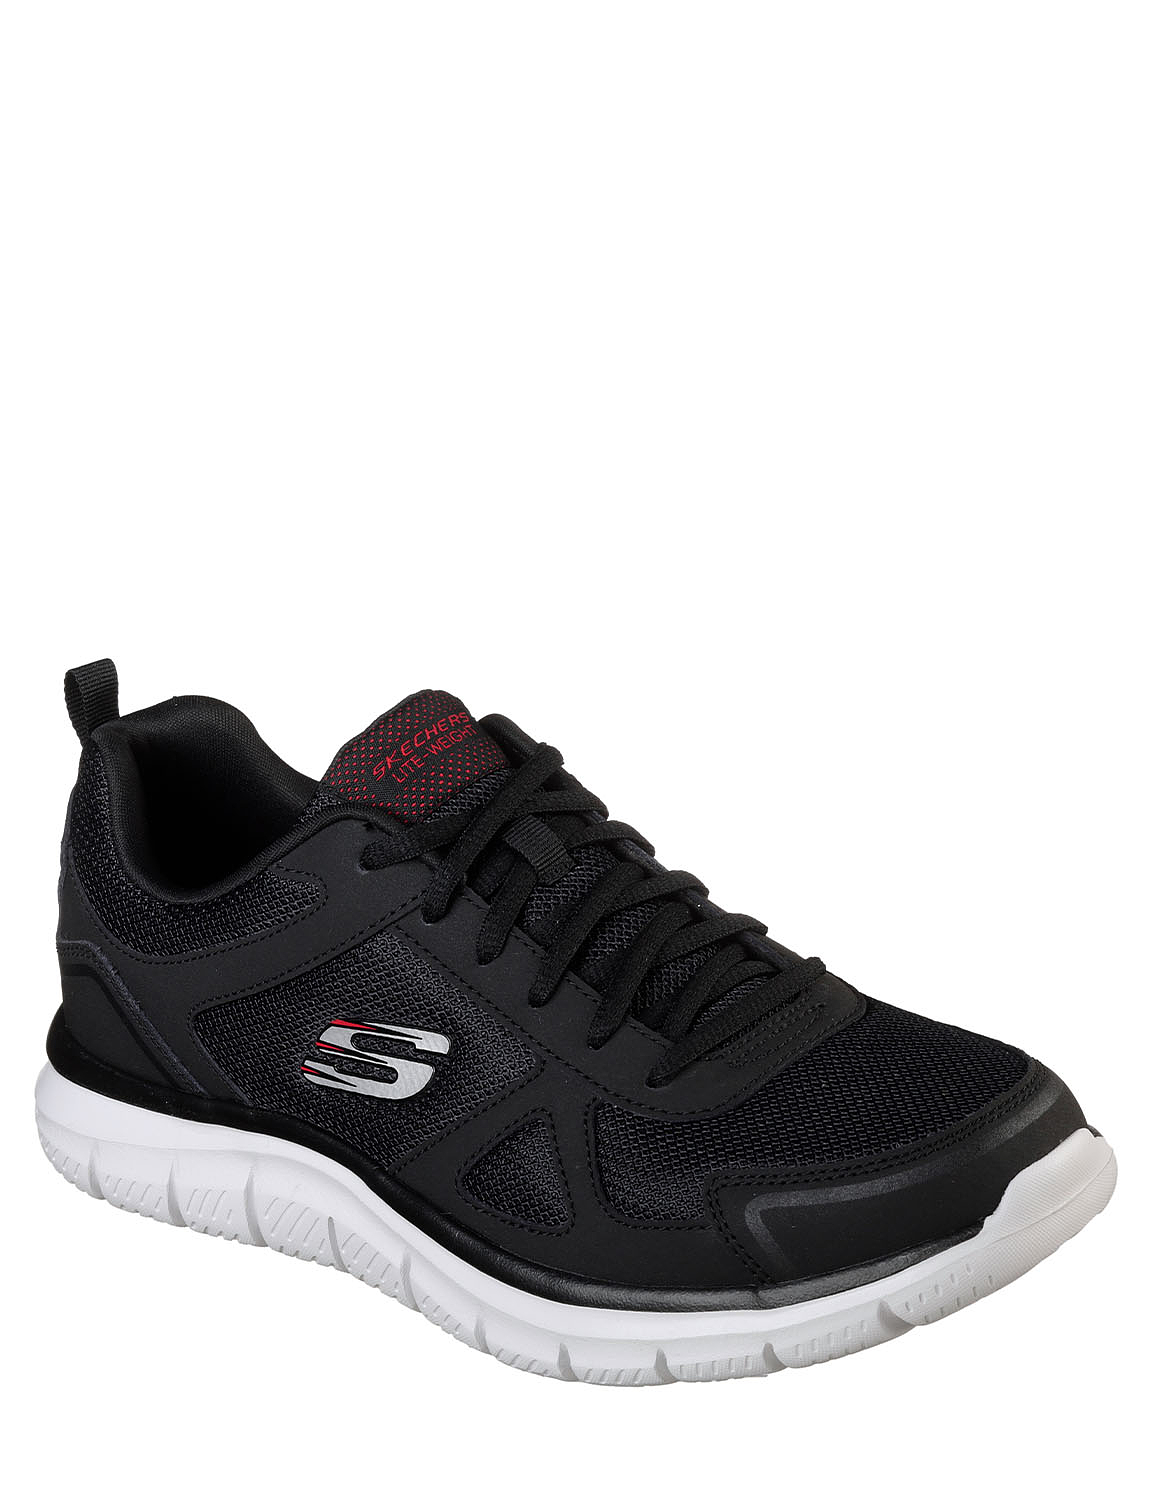 skechers wide fit collection